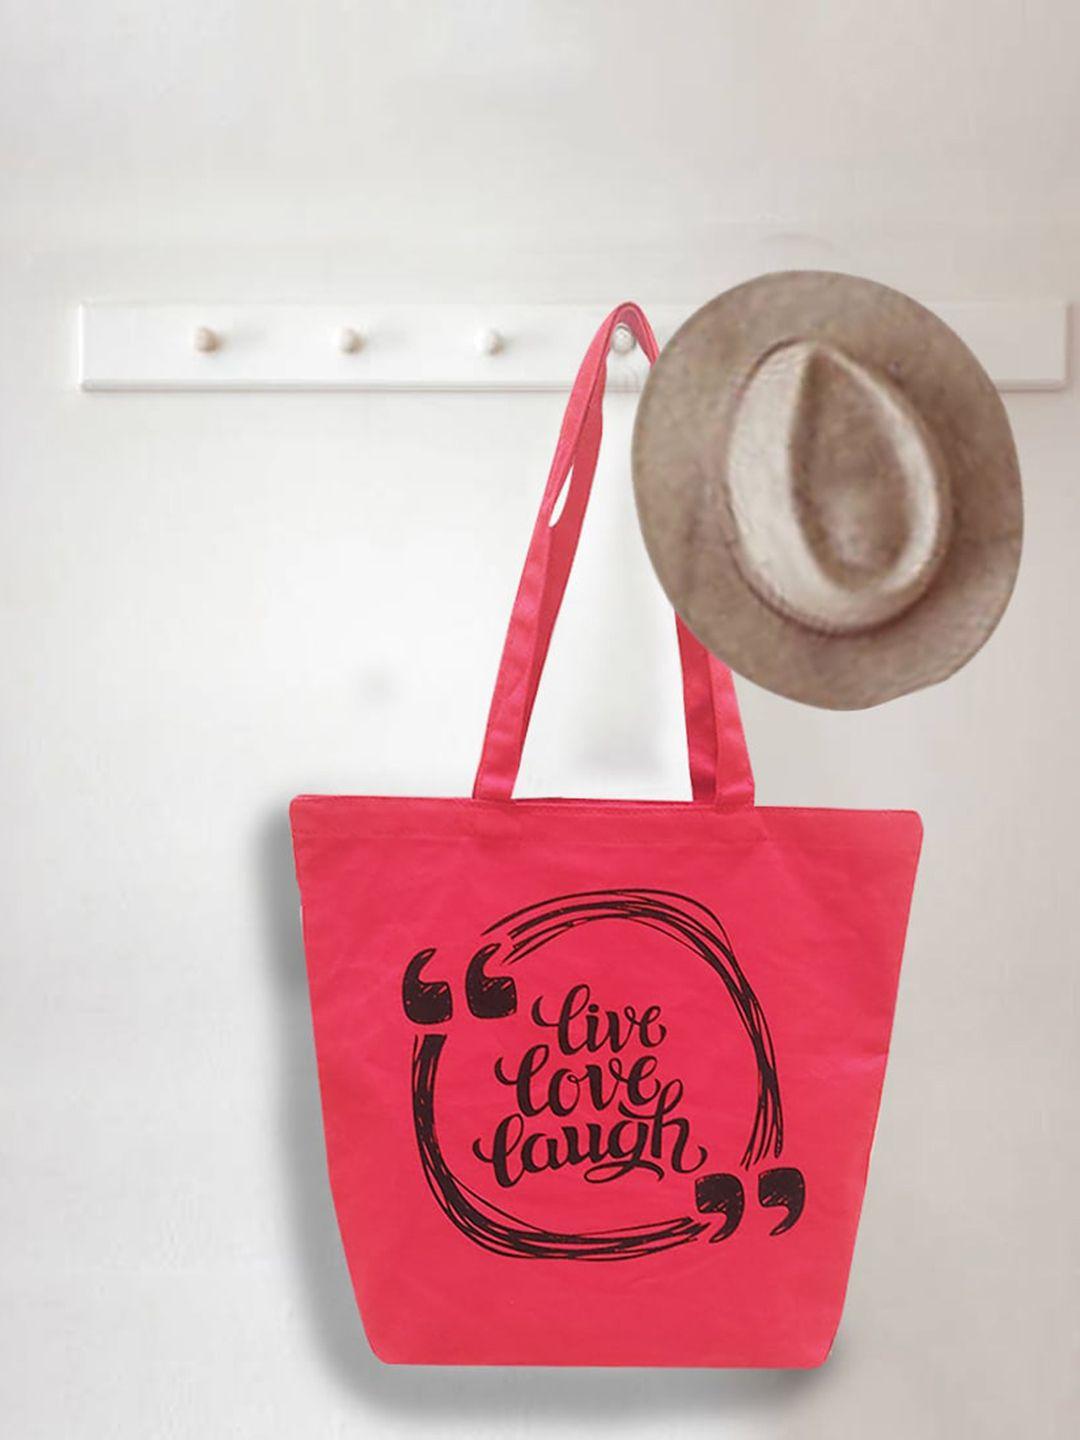 earthbags pack of 2 printed canvas shopper tote bag